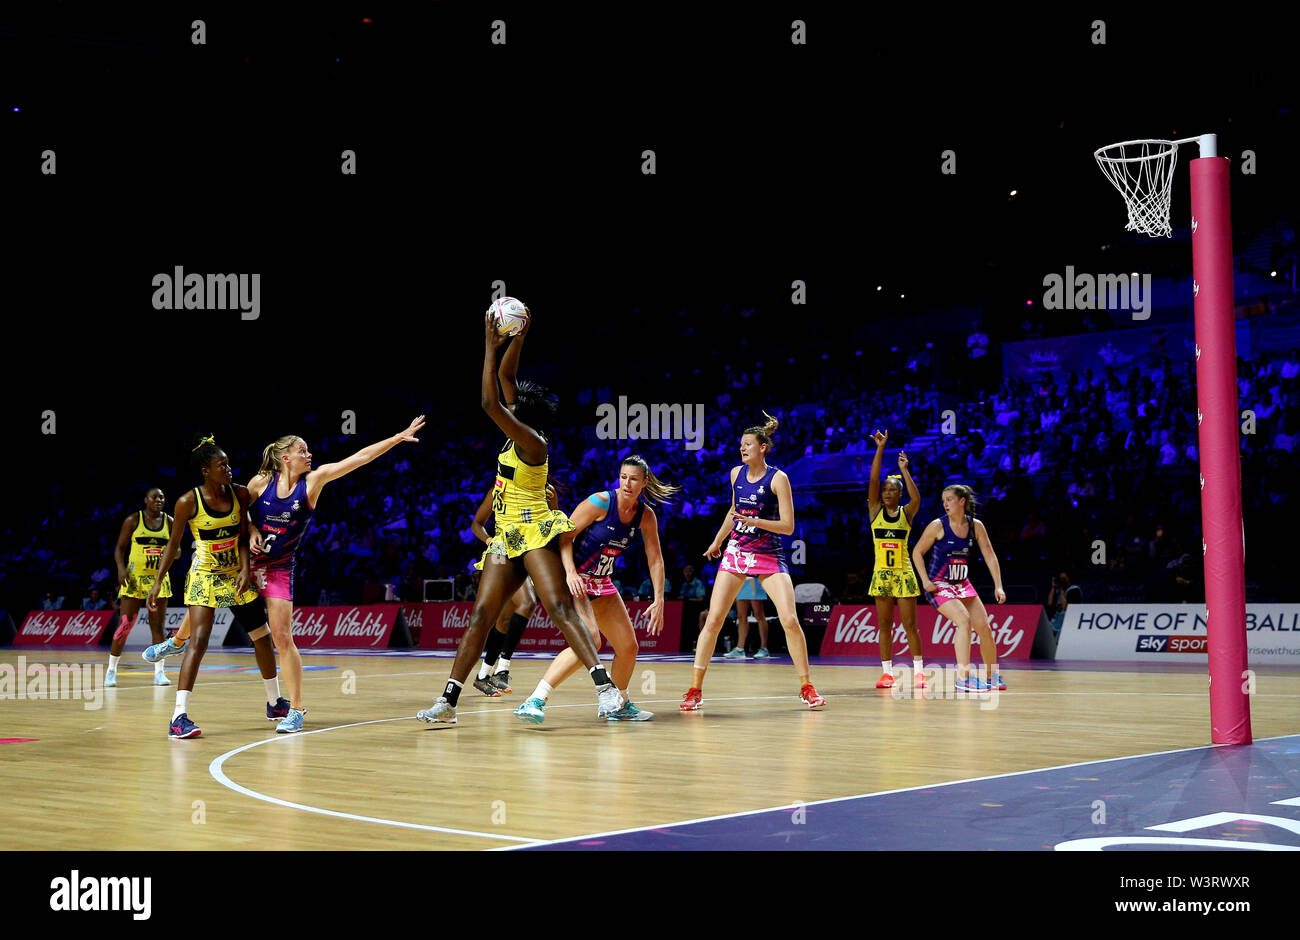 A general view of match action between Jamaica and Scotland during the Netball World Cup match at the M&S Bank Arena, Liverpool. Stock Photo